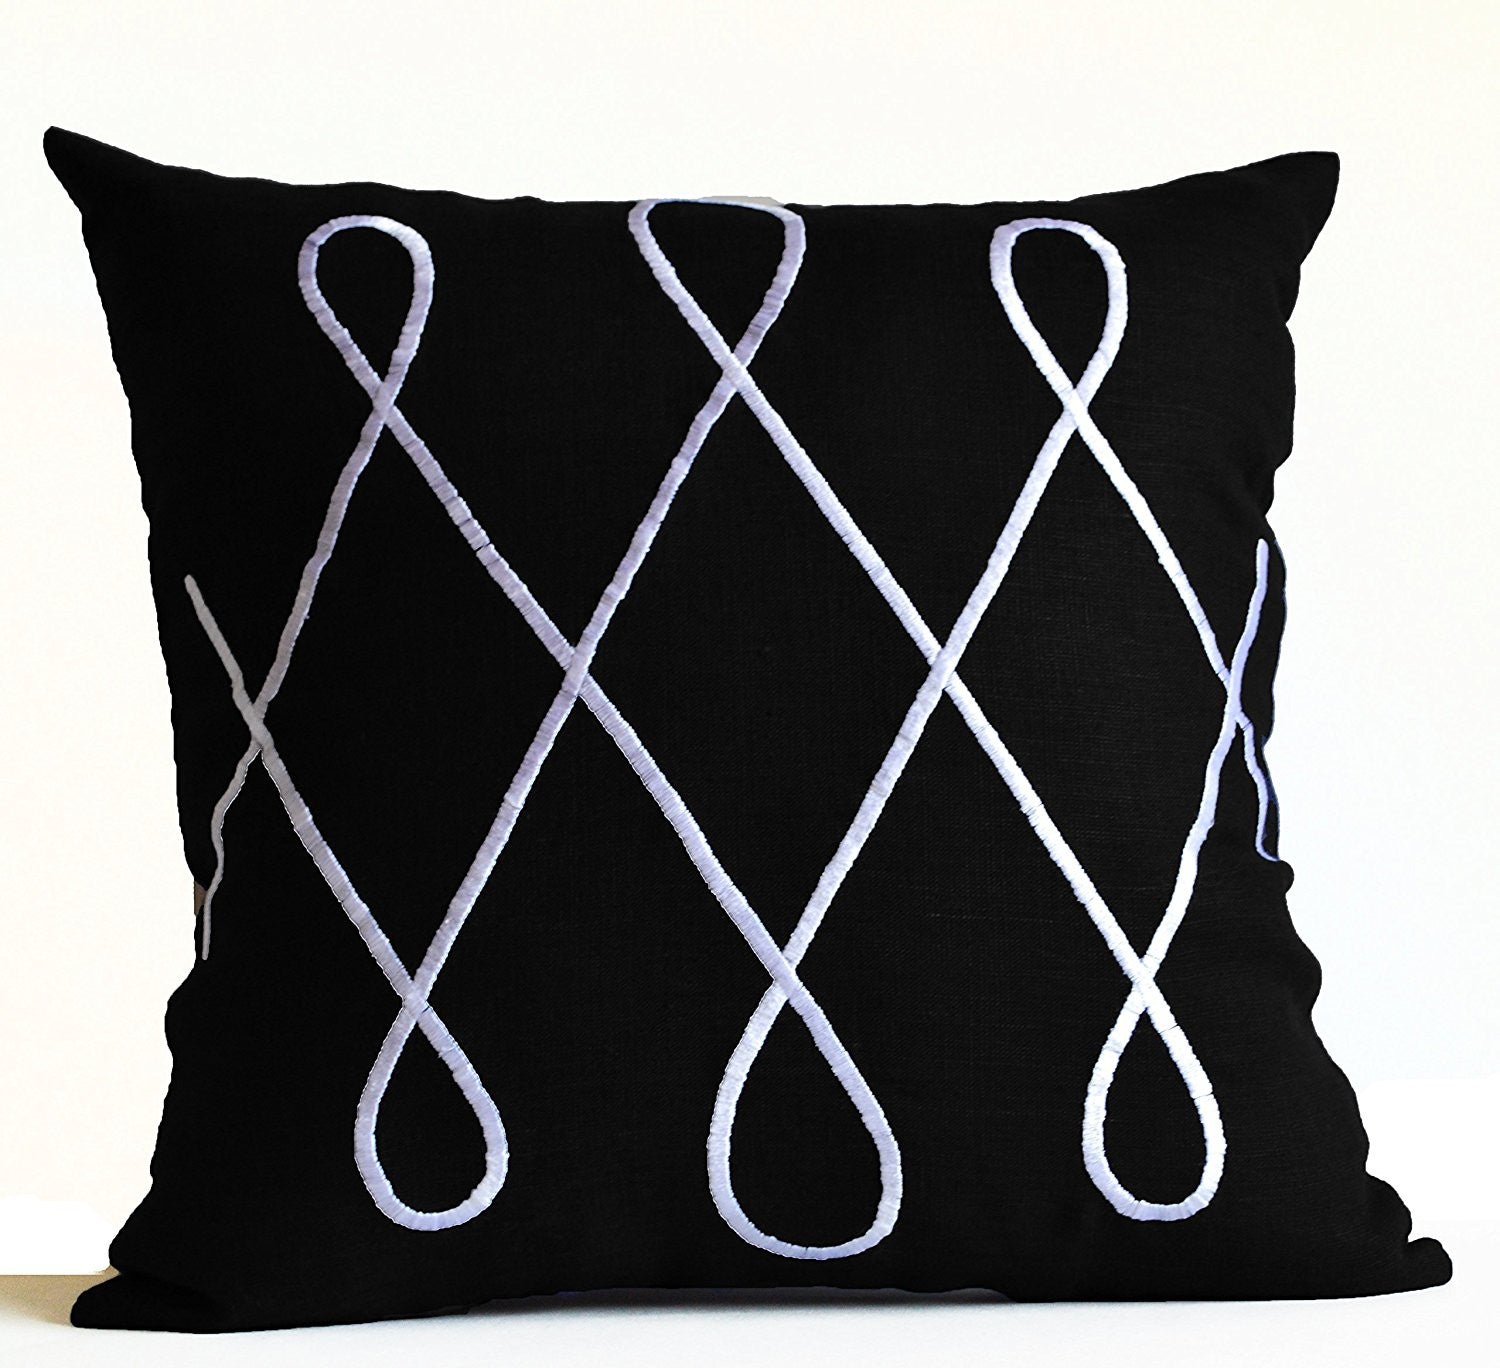 Amore Beaute Hand Embroidered Midnight Black Linen White Loop Pillow Cover, dorm room pillow 